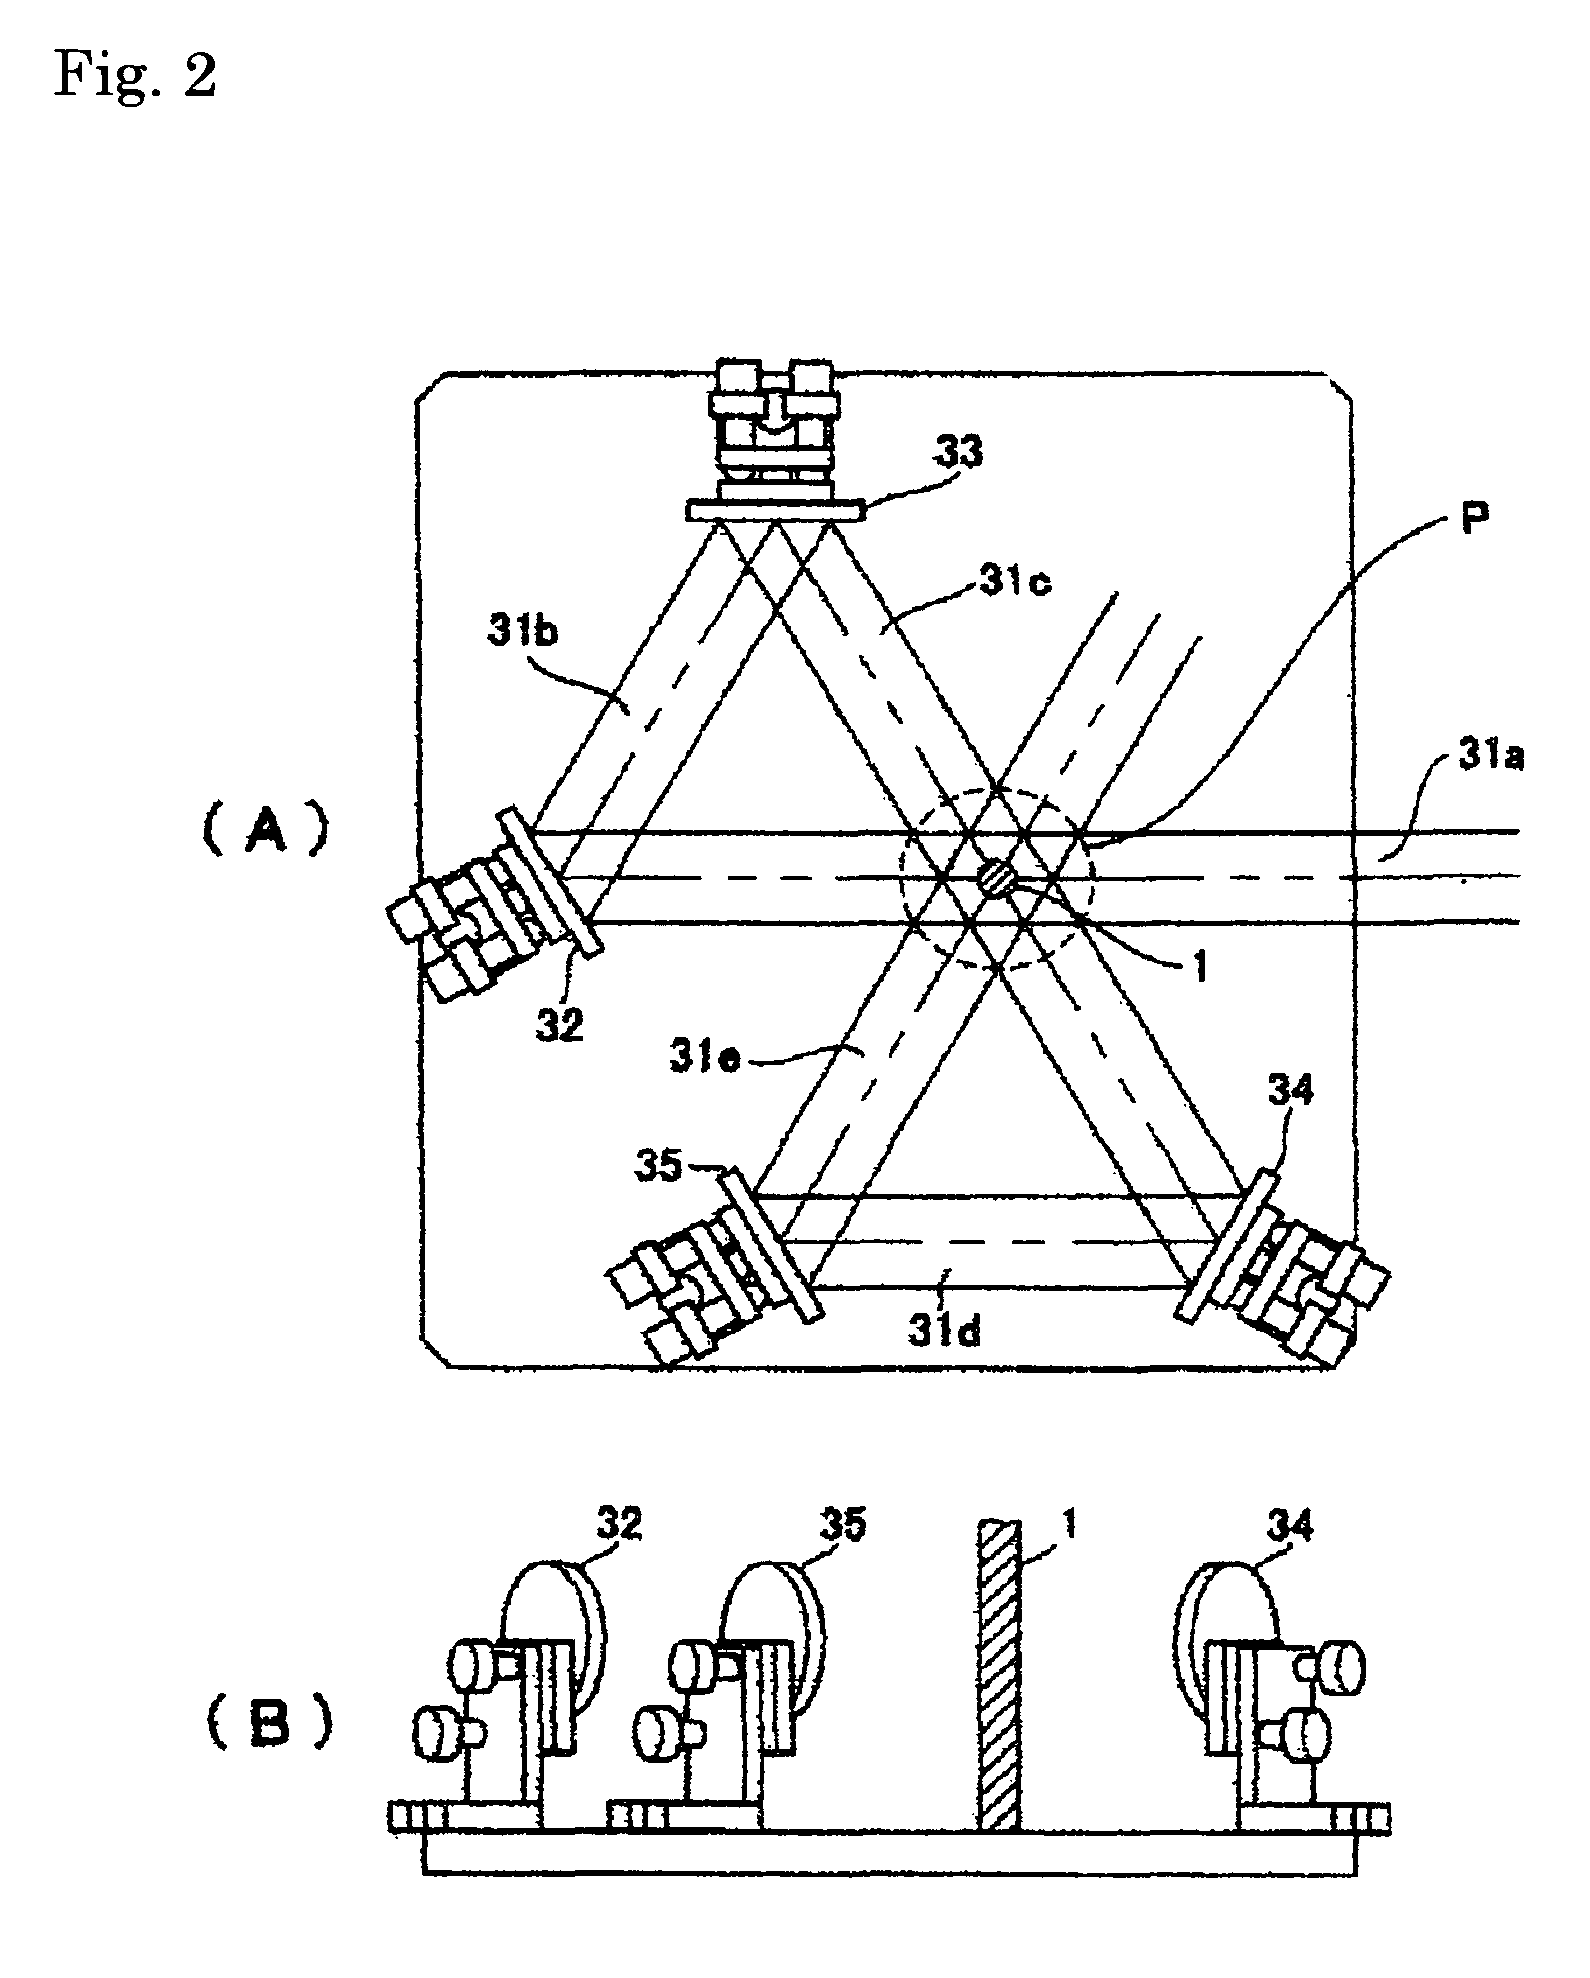 Method of manufacturing a drawn biodegradable micro-filament